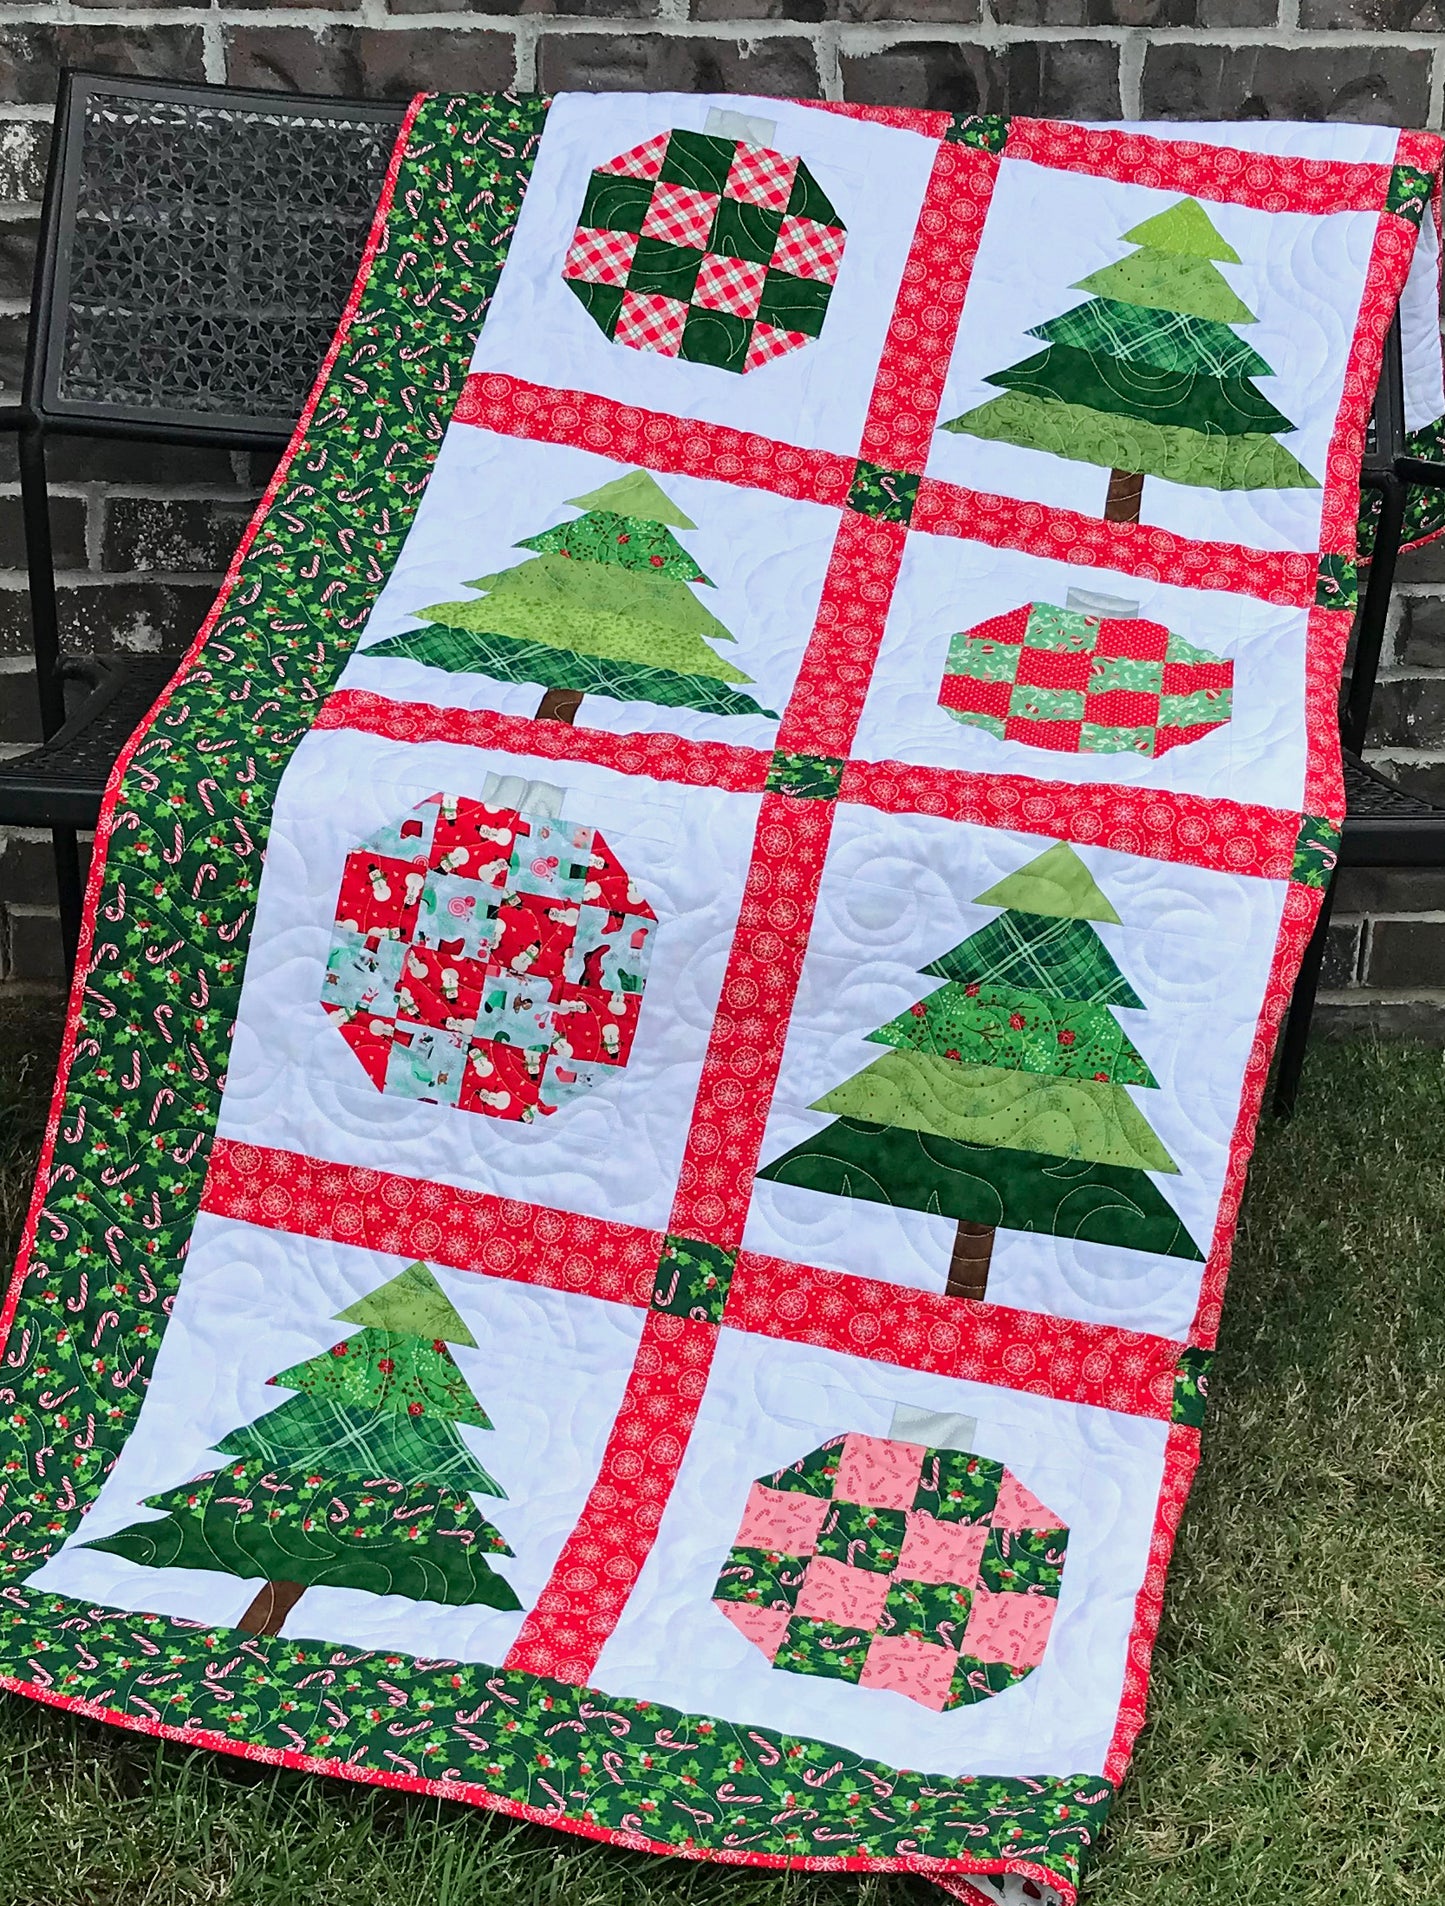 Christmastime quilt pattern with Christmas trees and ornament blocks surrounded by red sashing and a green holly border. Quilt is shown draped across a bench.